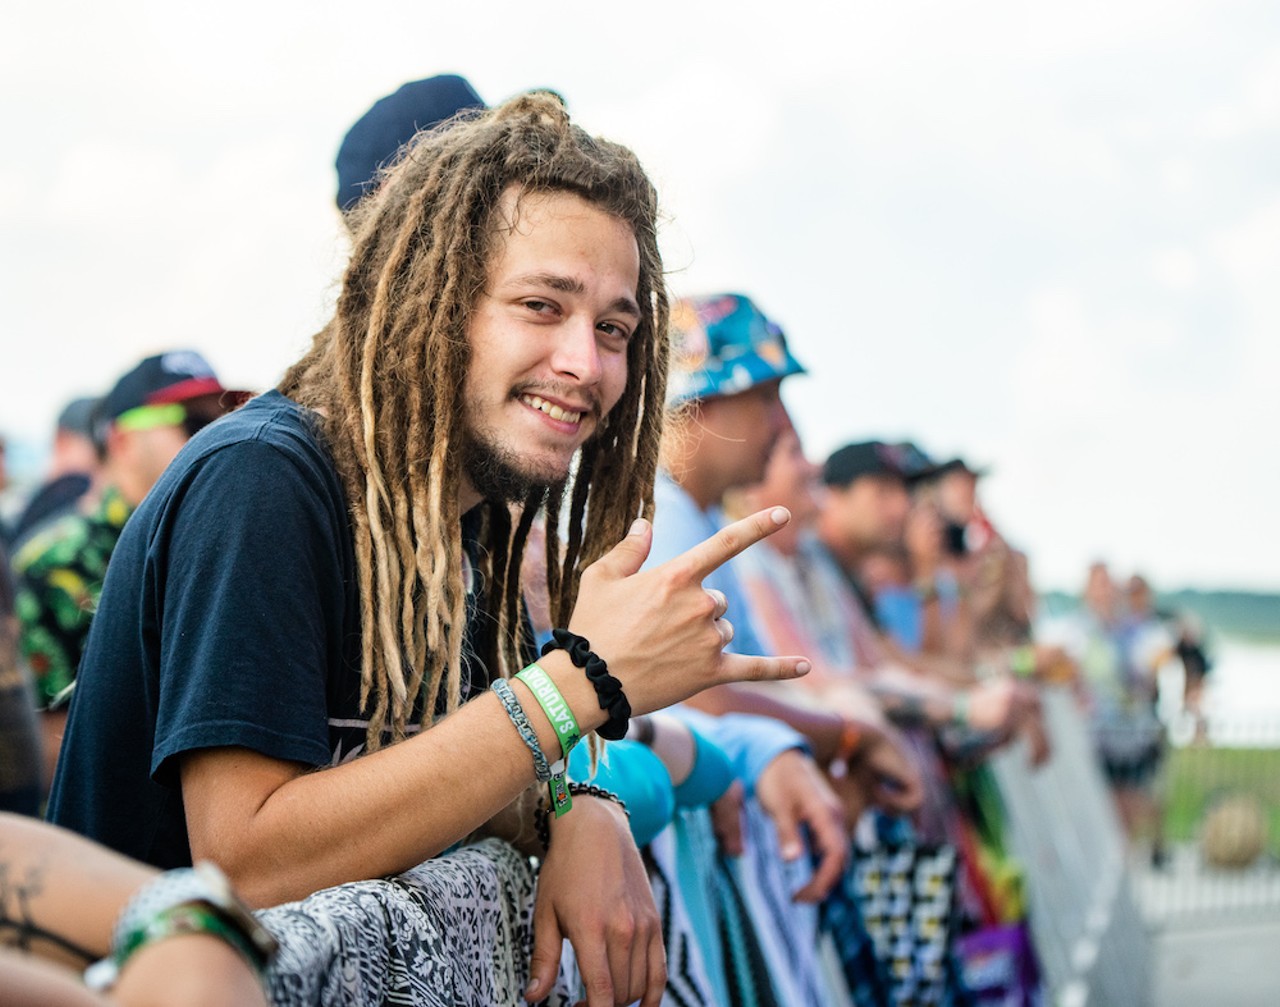 The Florida Groves brought two days of music, cannabis and good vibes to the Fairgrounds